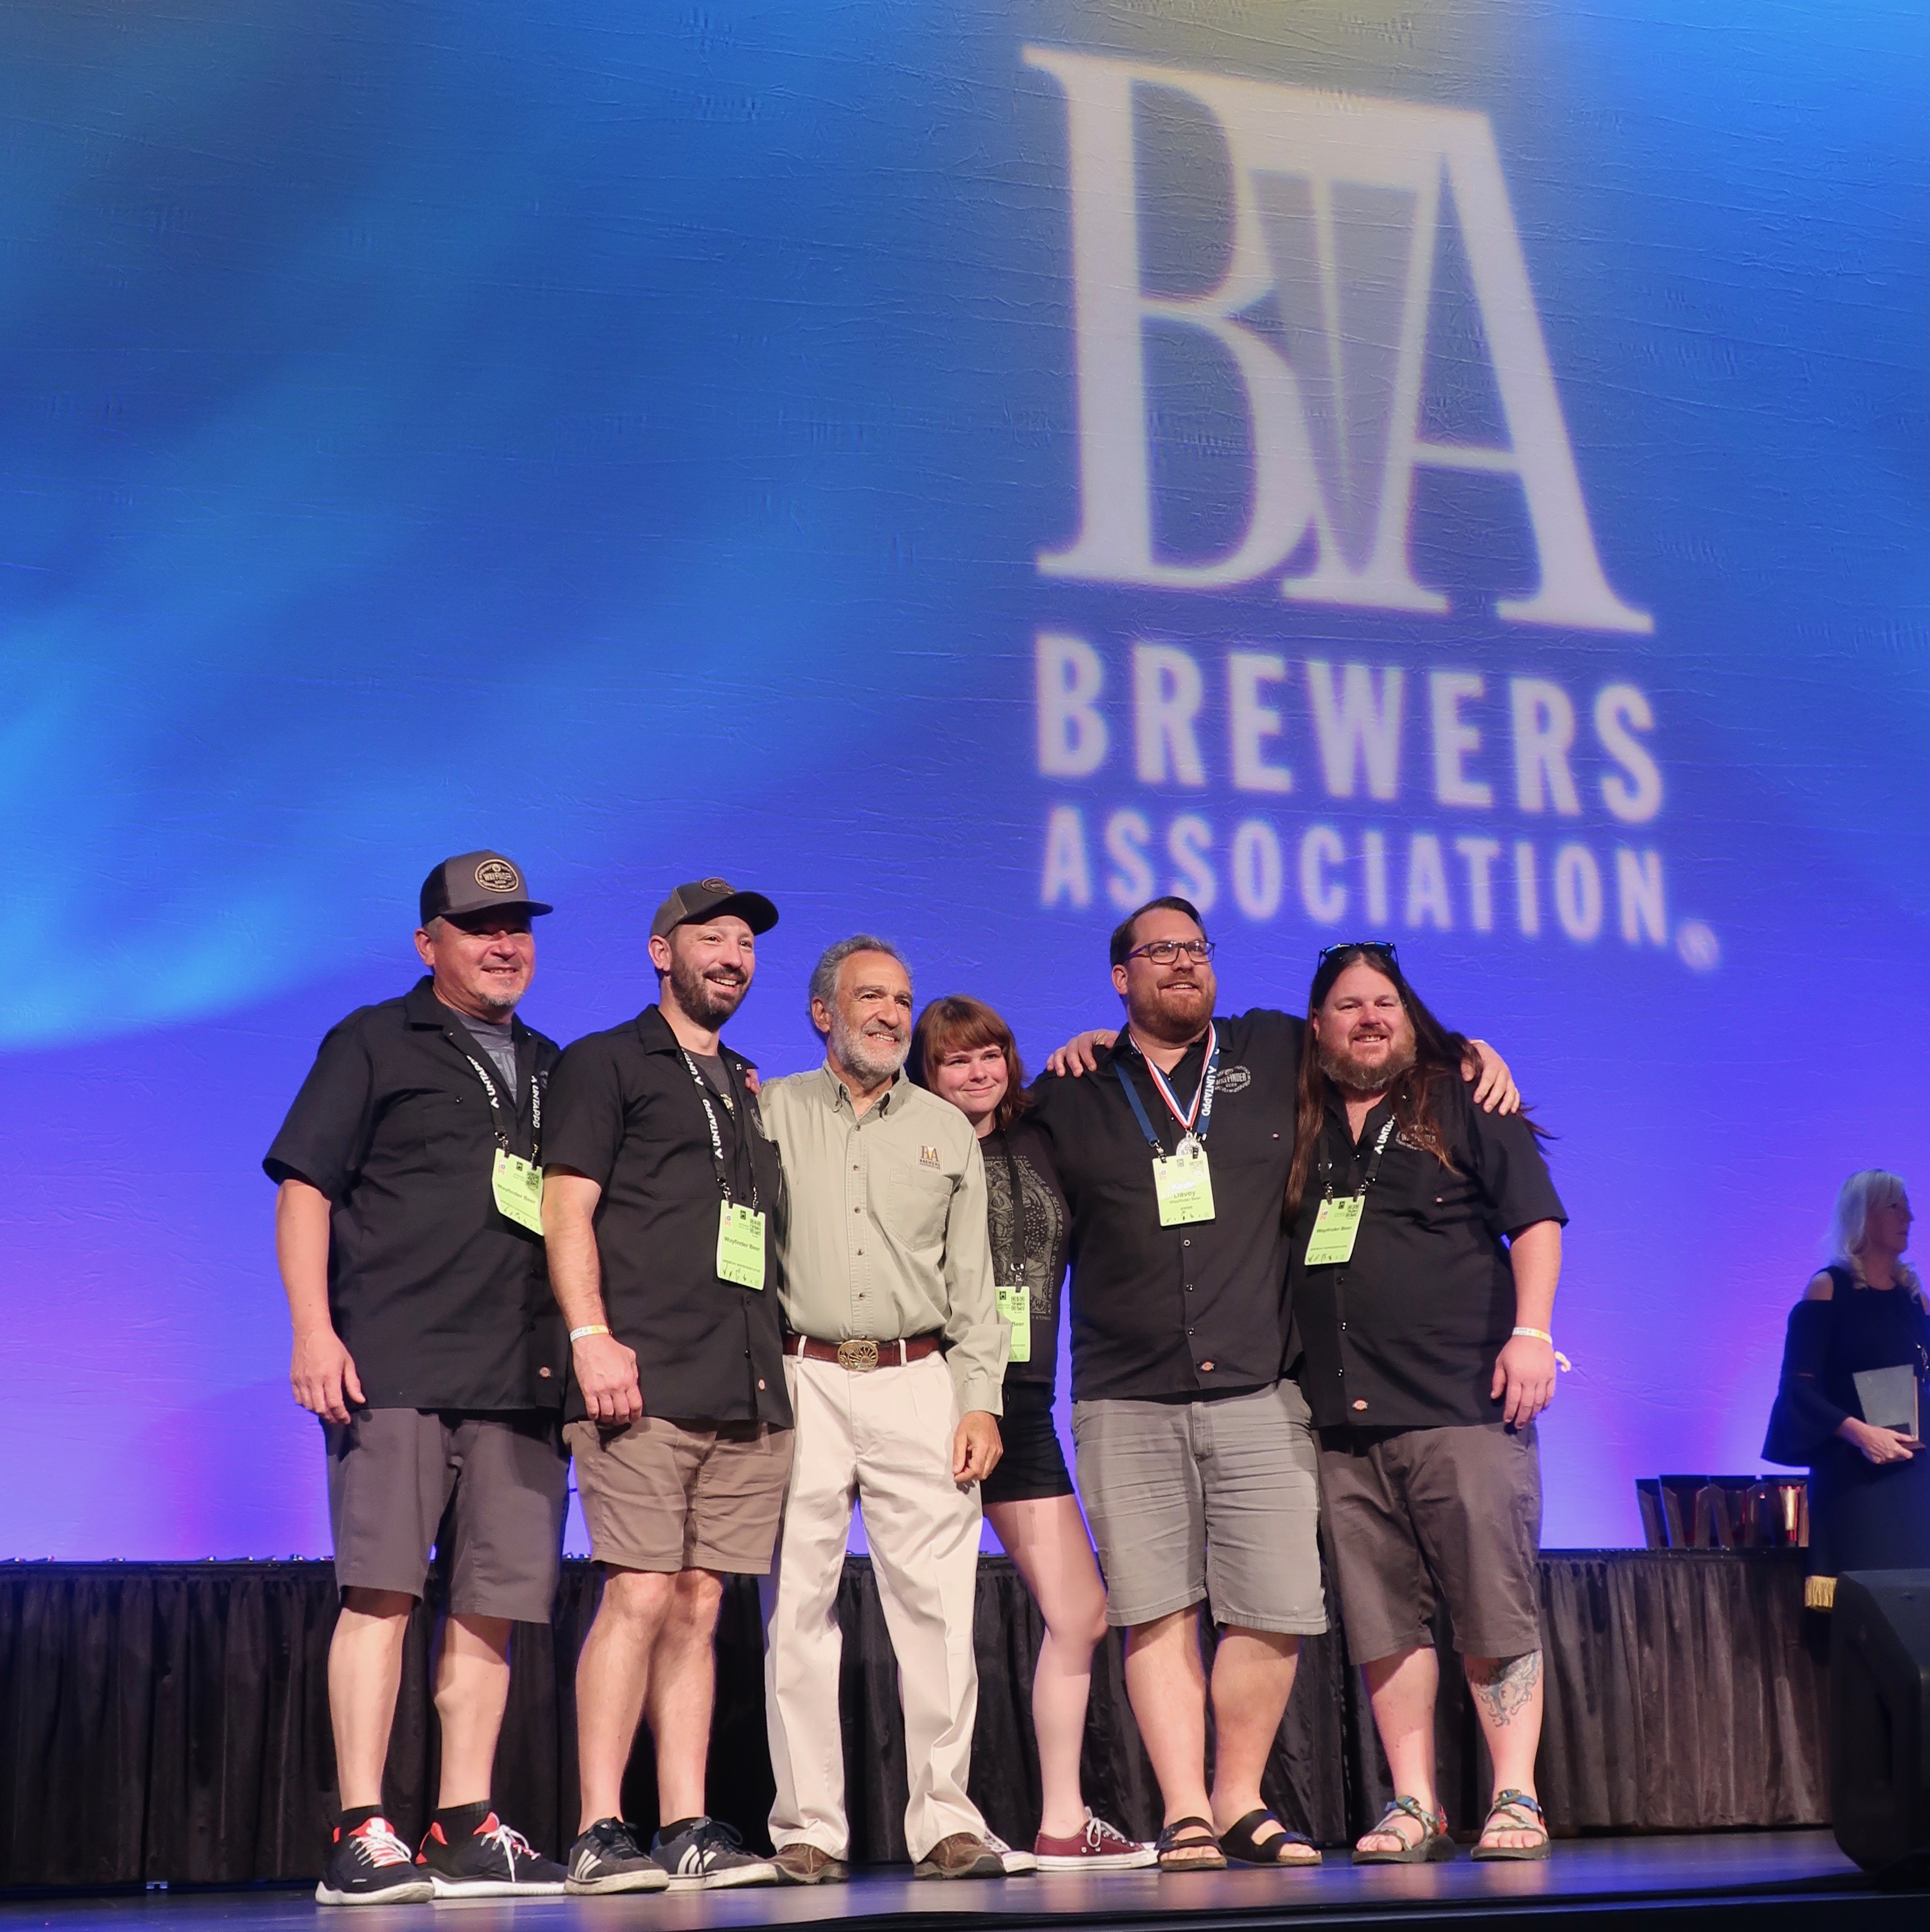 Wayfinder Beer wins its first GABF Medal at the 2018 Great American Beer Festival.